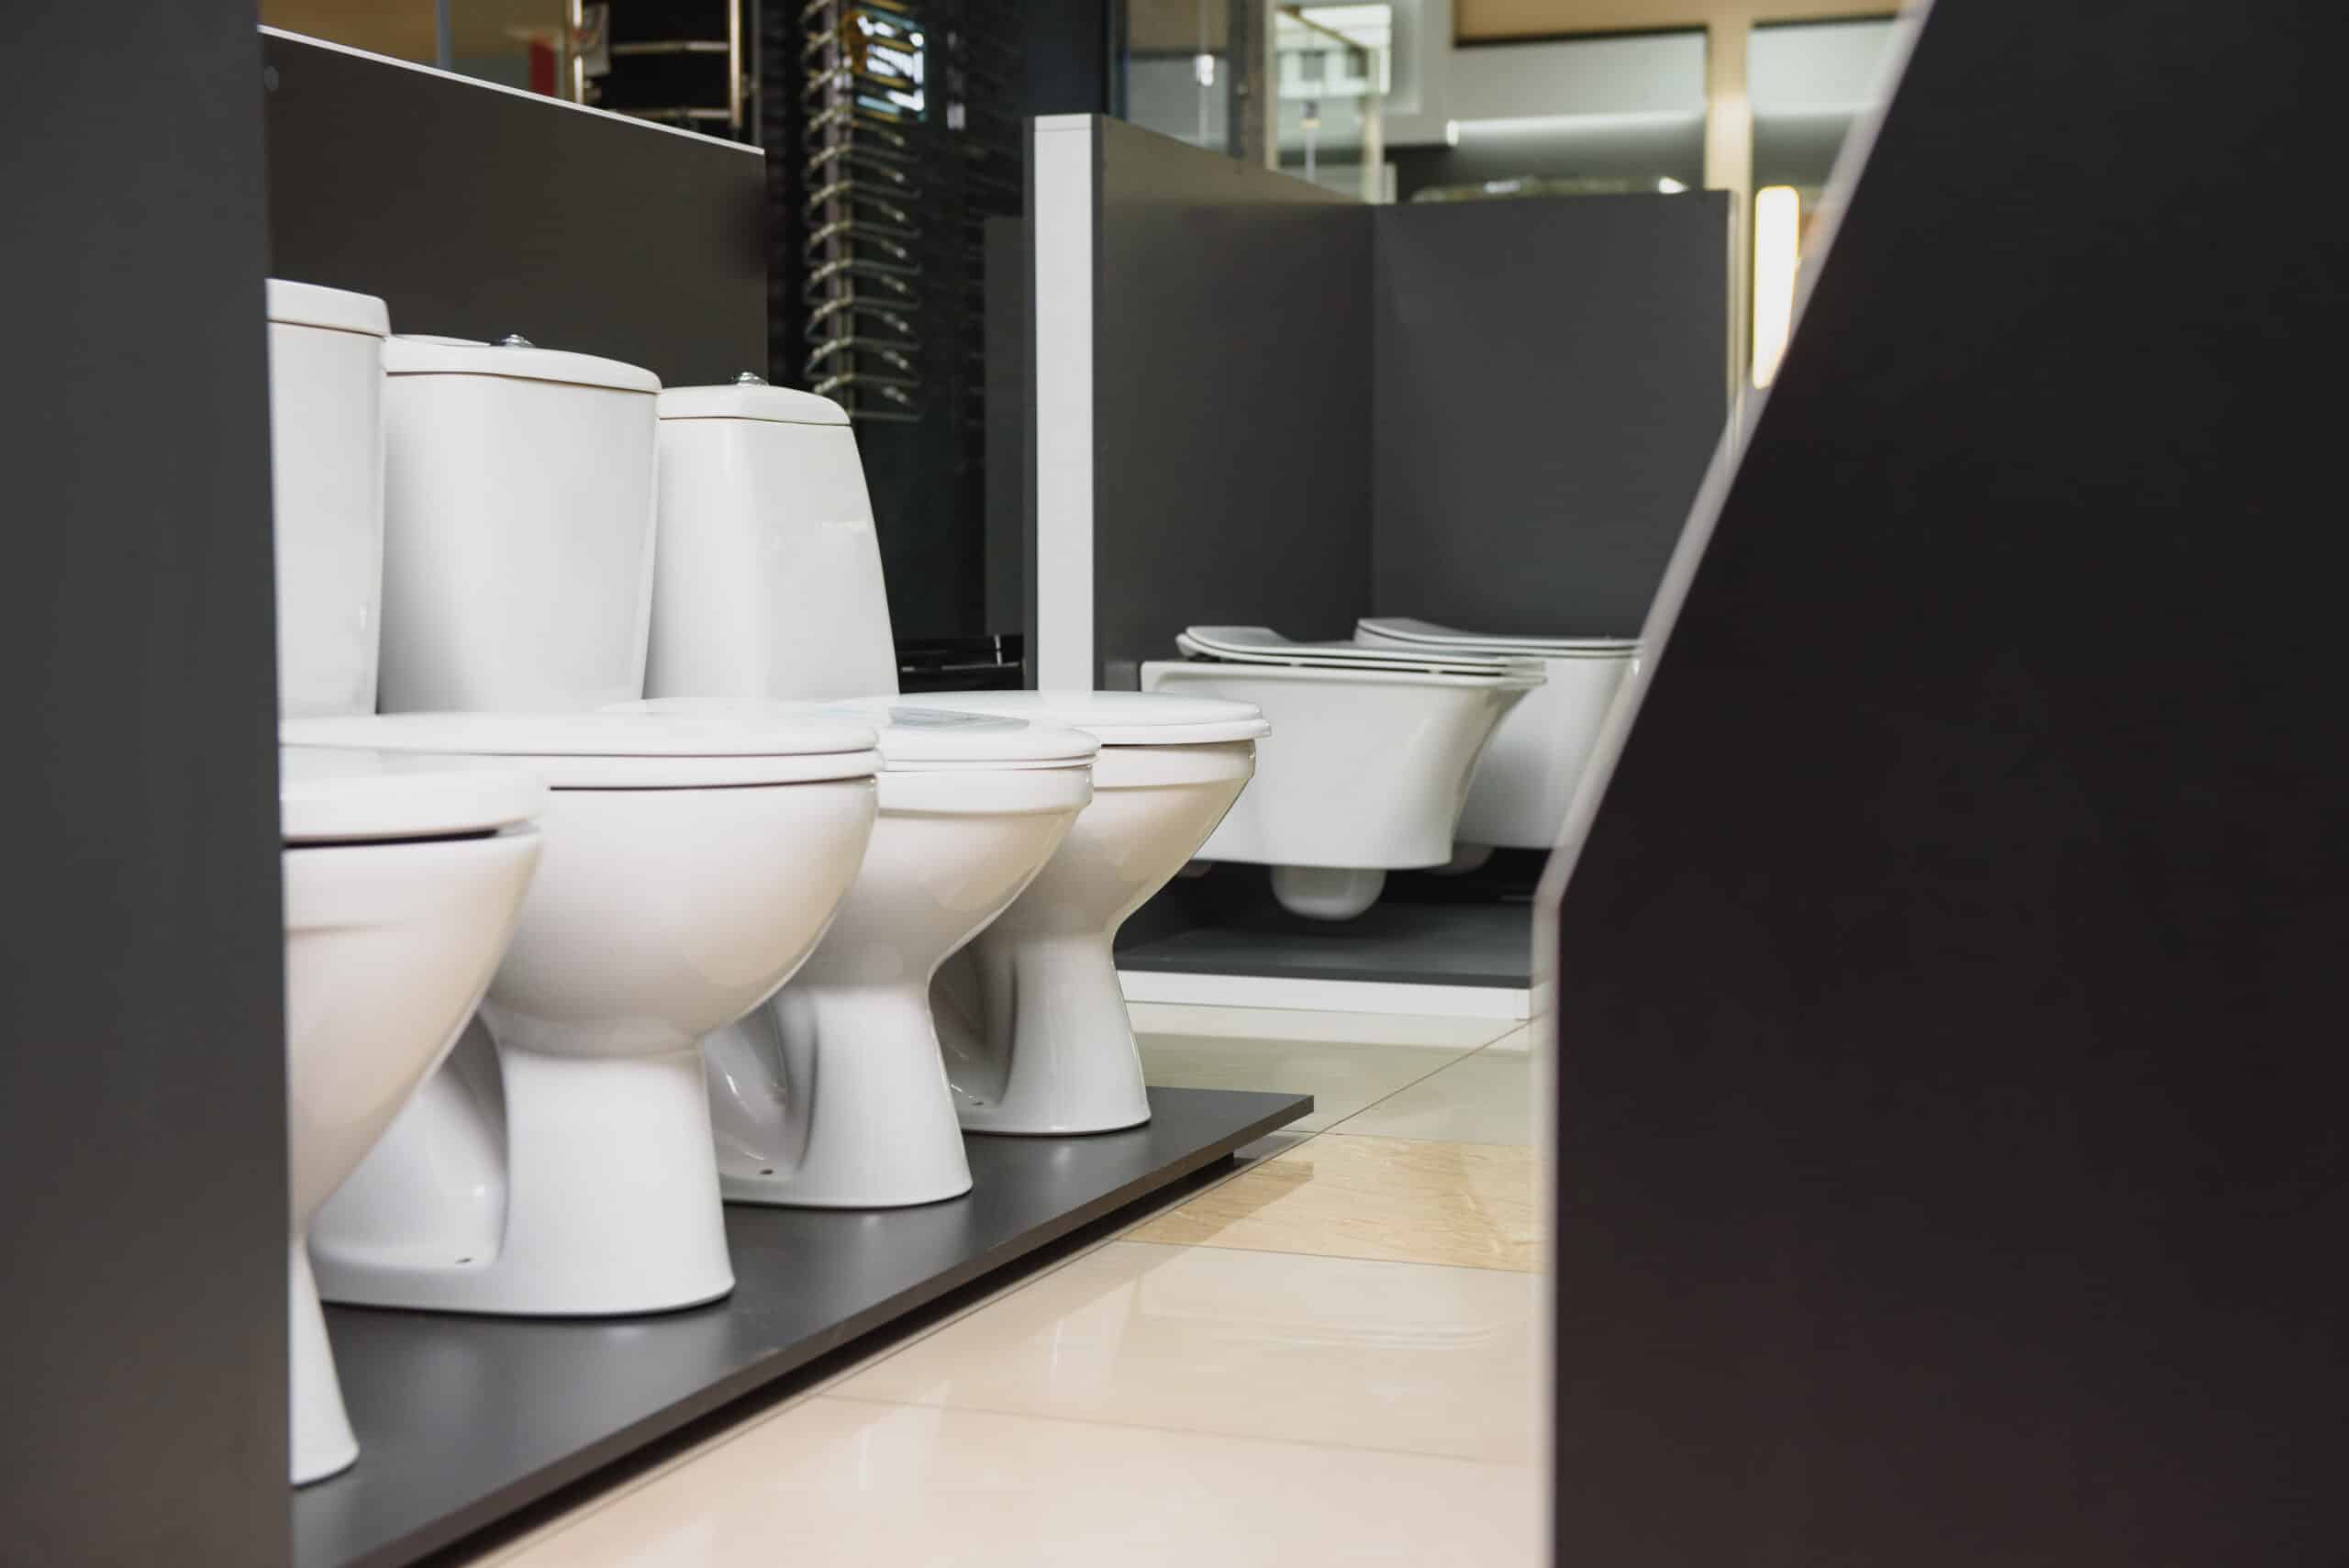 Chicago toilet repair and installation